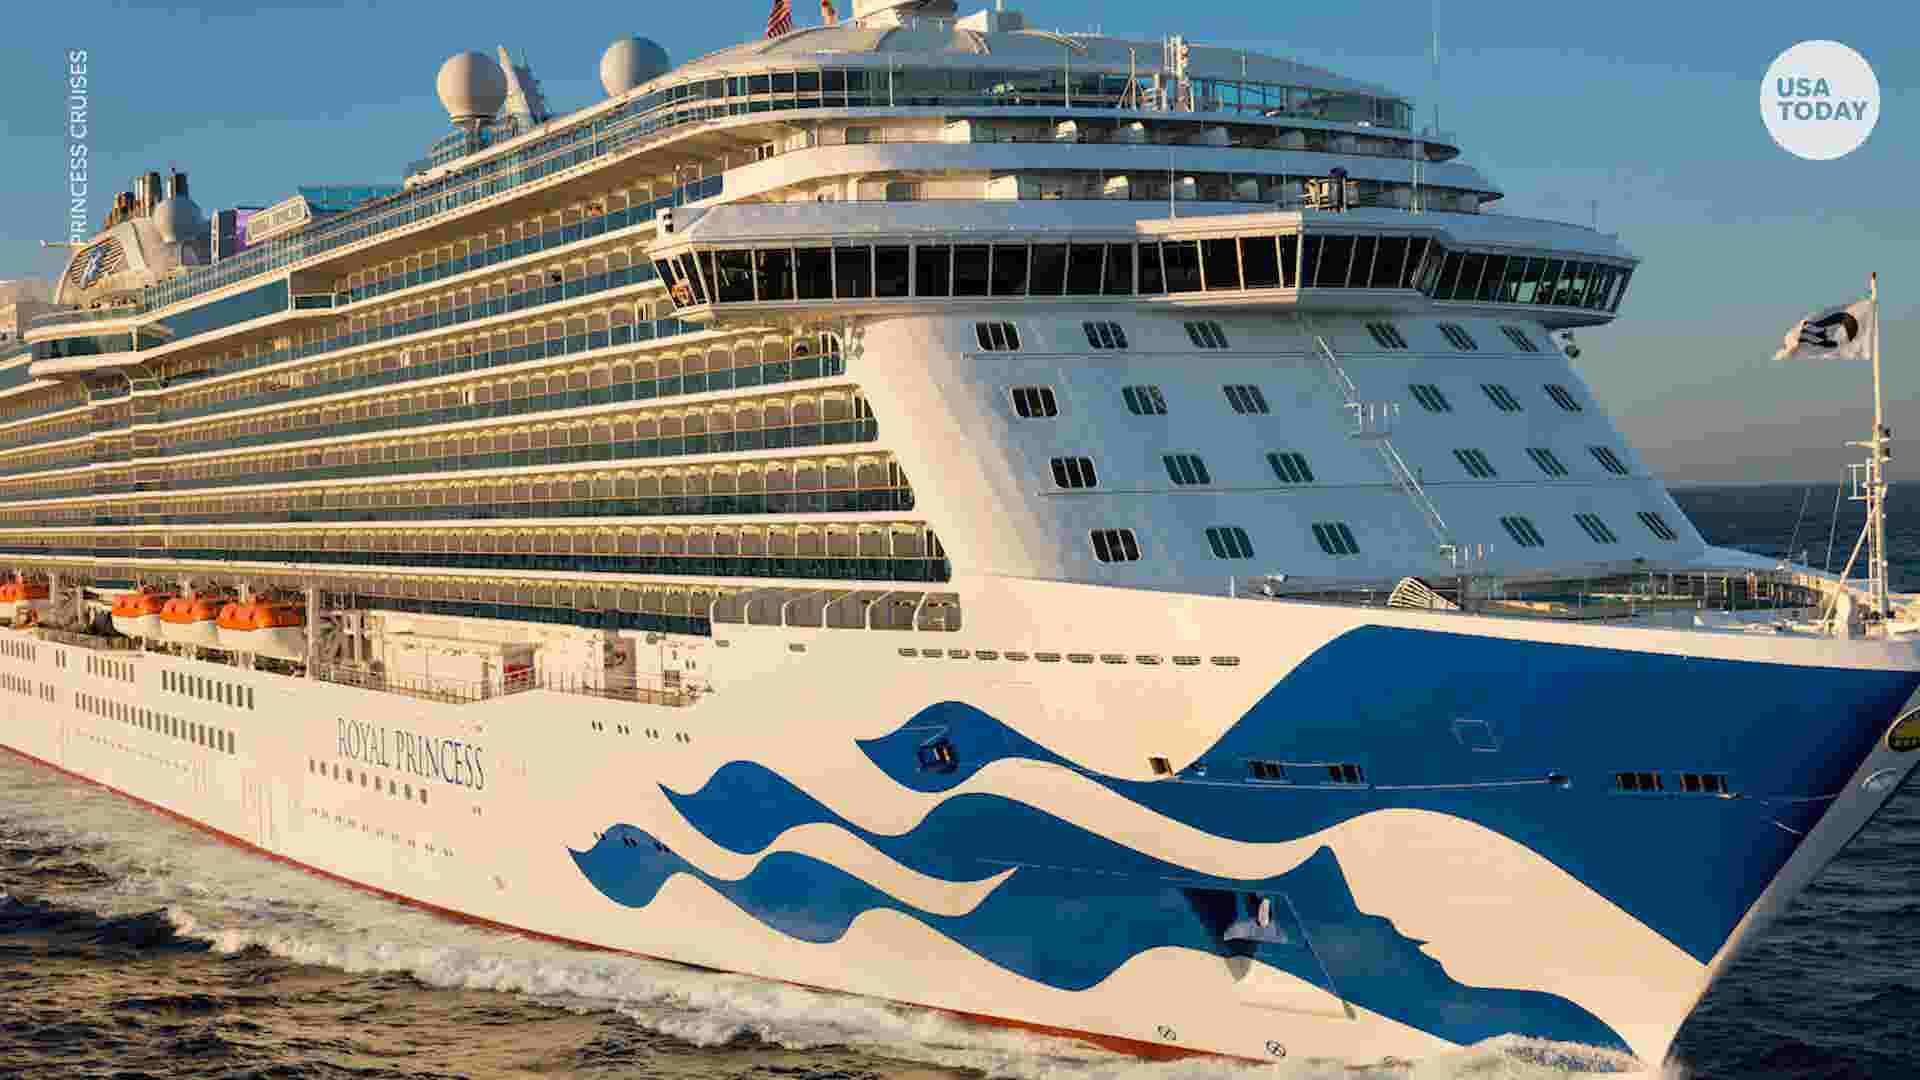 U.S. woman's death on cruise may have been murder, reports say